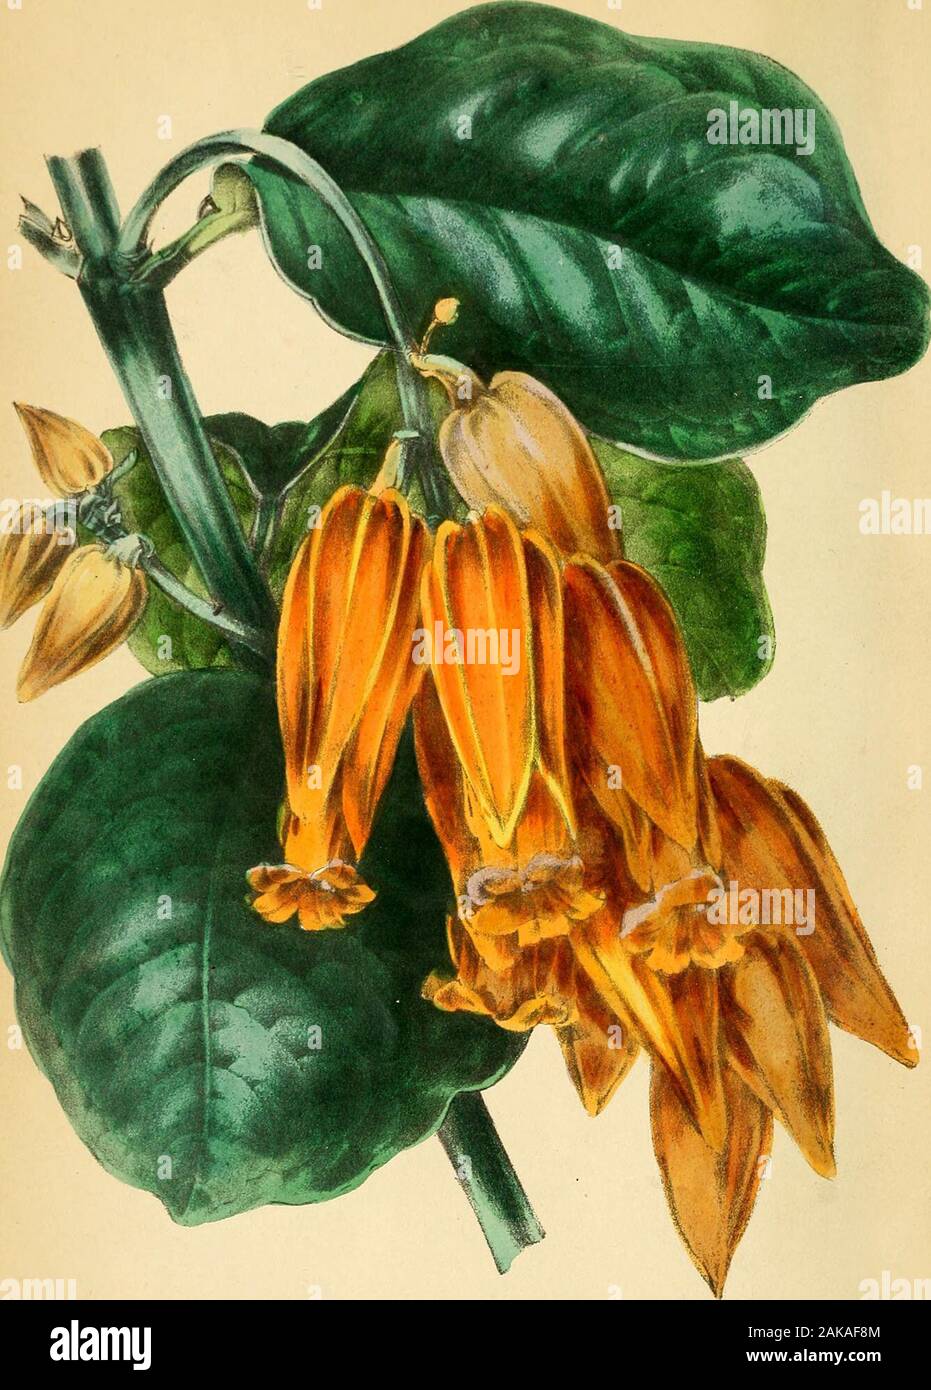 Paxton's Magazine of Botany and Register of Flowering Plants . .-&gt; HnLnert t-j * ijth ^yO/nJUc J^uyu/^t^^act BRUGMANSIA FLORIBUNDA. Class*PENTANDRIA. (Many-flowered Brugmansia ) Natural Order, SOLANACEiE. Order. MONOGYNIA. Generic Character.—Calyx tubular, ventricose, five-angled, permanent, coarctate (compressed) at top, andtwo, three, or five-lobed. Corolla funnel-shaped, five-folded, five-lobed ; lohes cuspidate. Slamens five, in-closed, coarctate; anthers conglutinate (adhering).Stigma thick, two-lobed, with revolute margins. Cap-sule two-celled, smooth, many-seeded. Seeds opaque,^^nifo Stock Photo